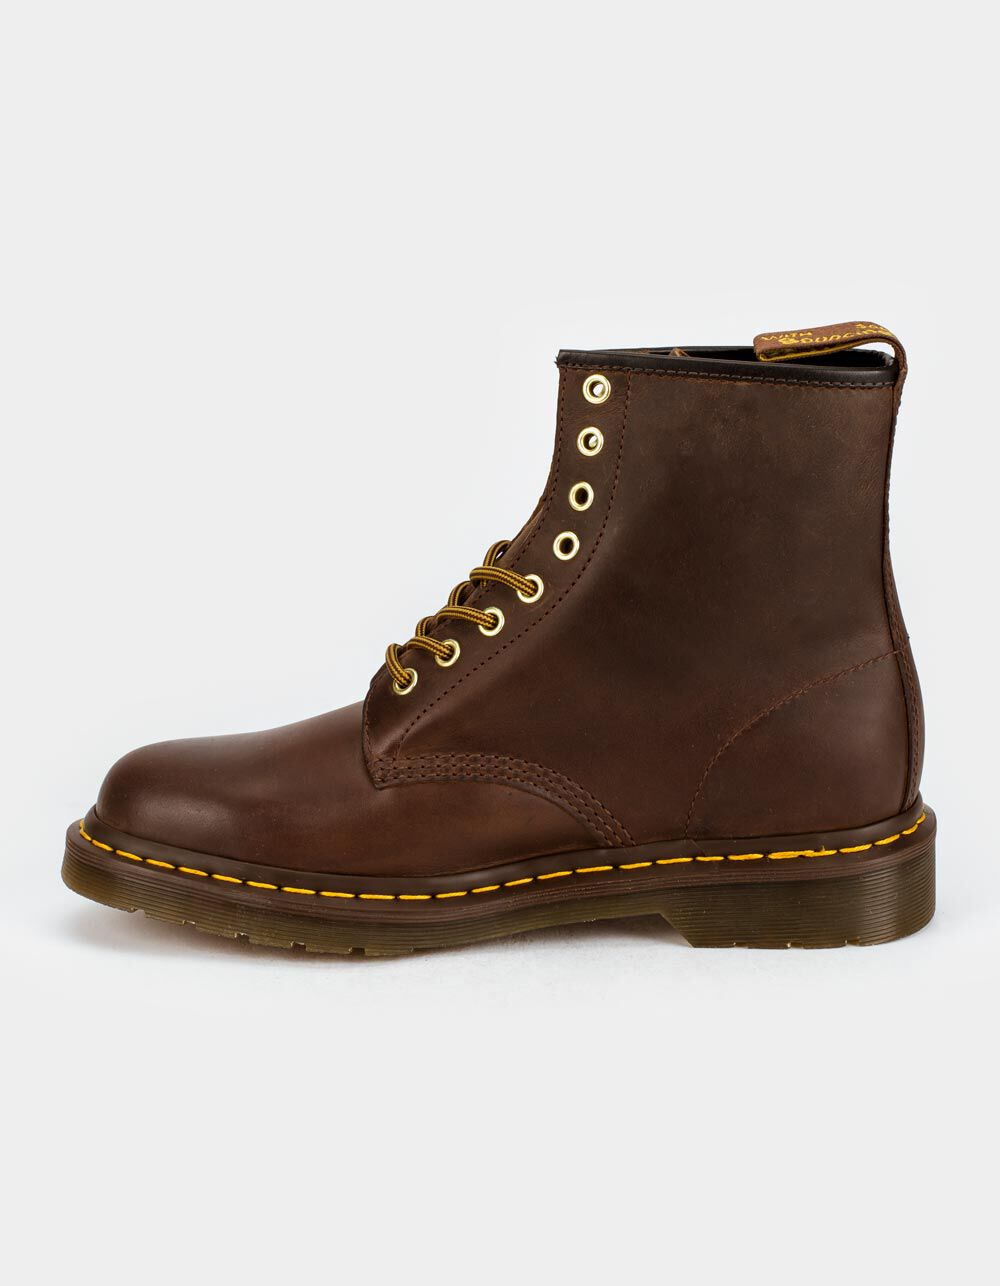 DR MARTENS 1460 Crazy Horse Leather Lace Up Mens Boots - BROWN | Tillys